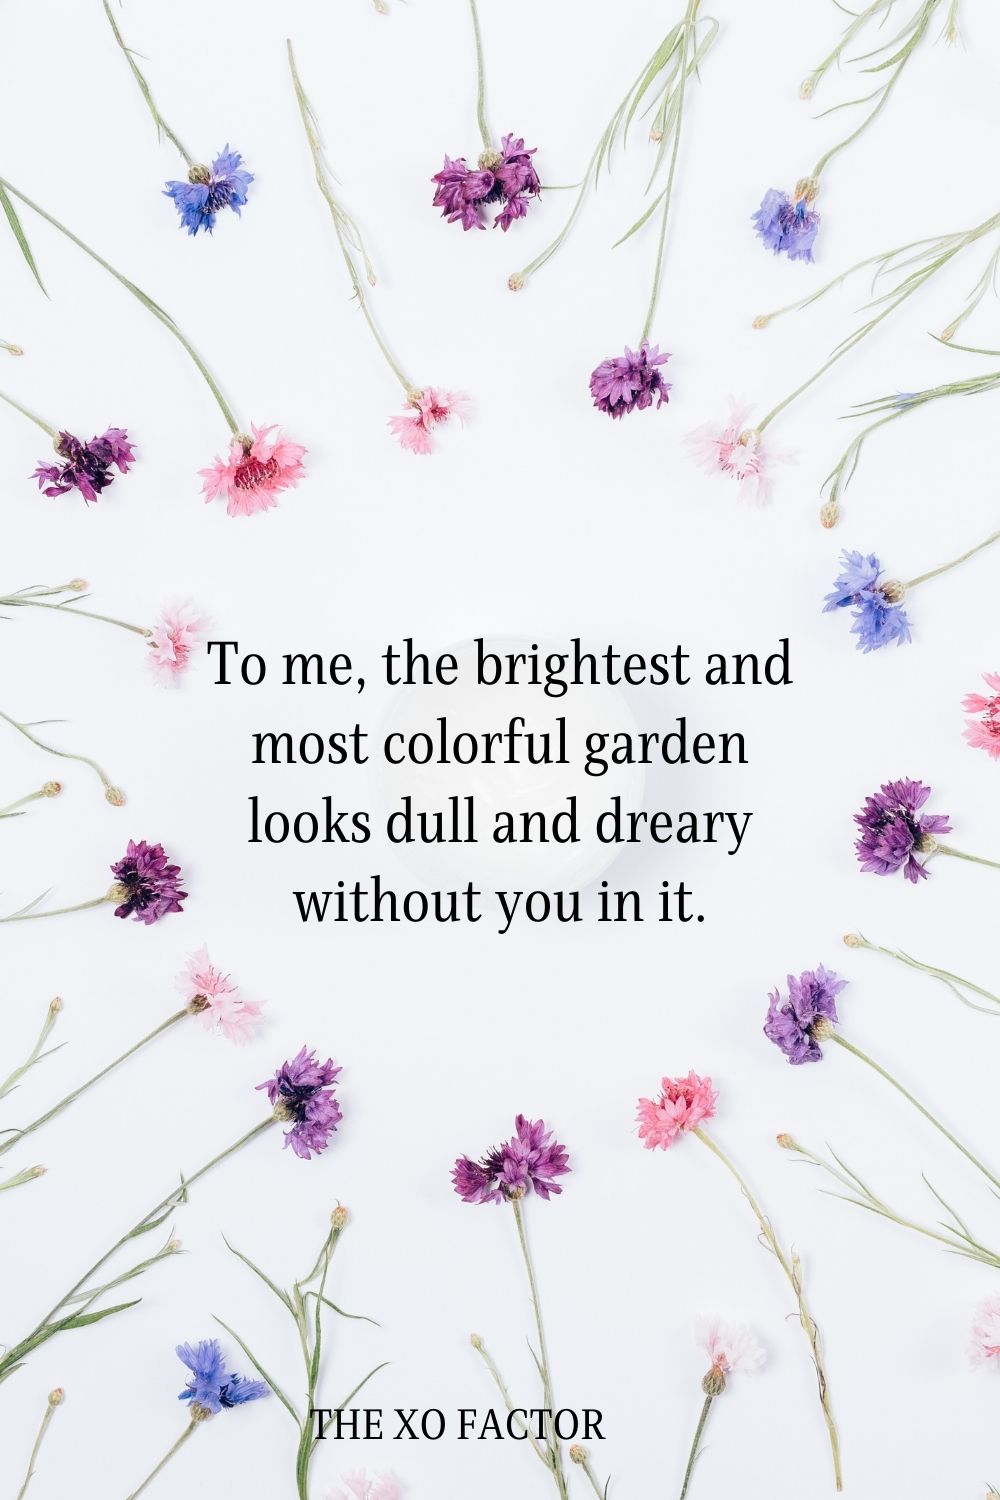 To me, the brightest and most colorful garden looks dull and dreary without you in it.